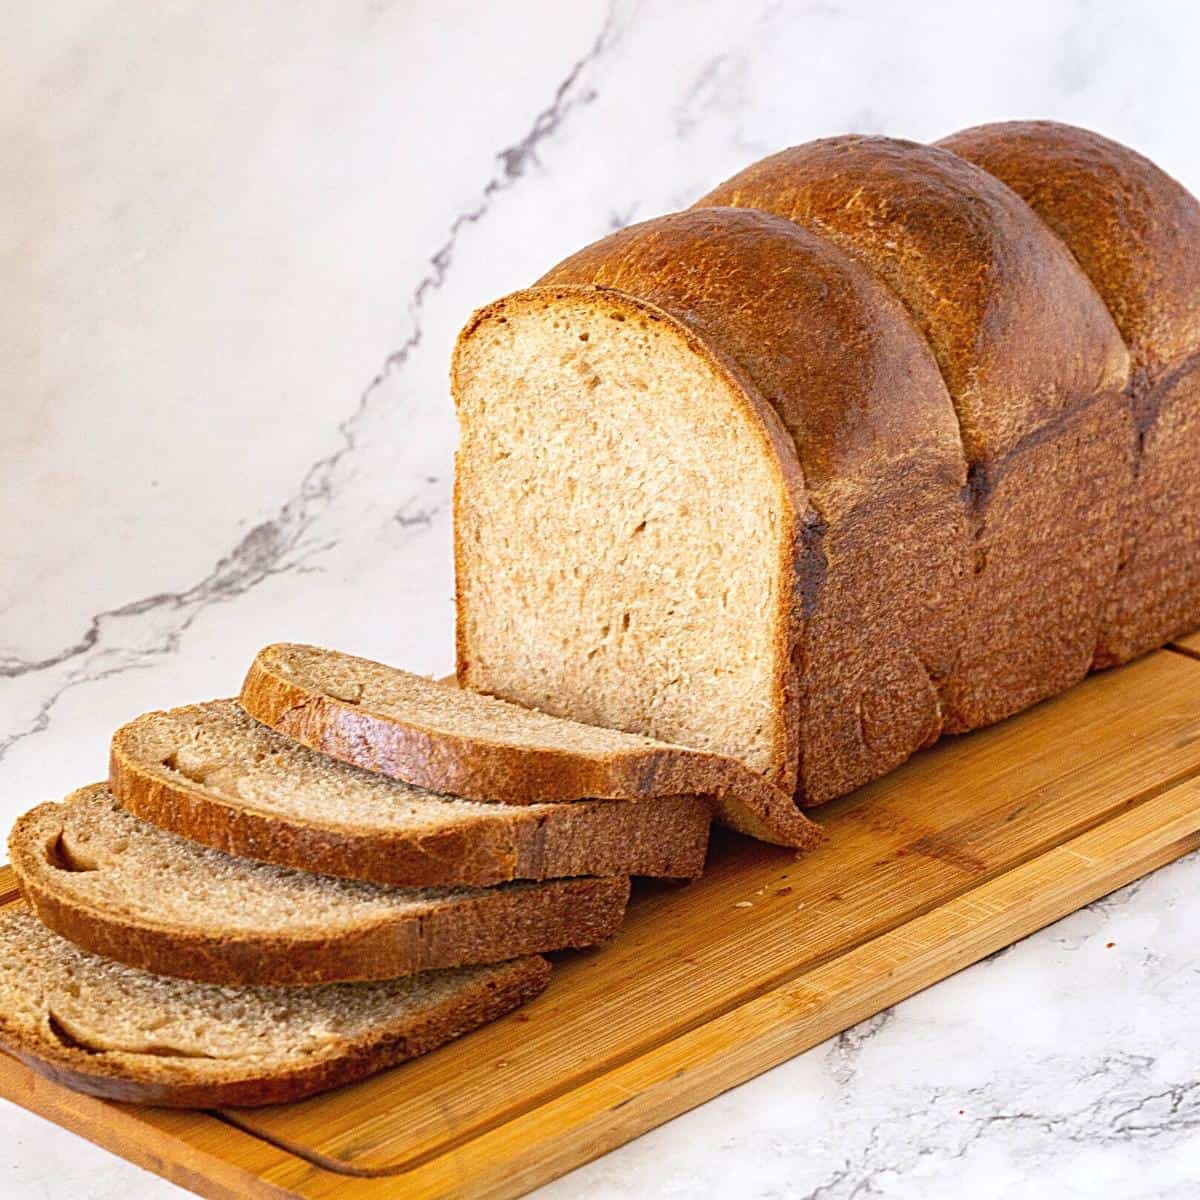 A sliced bread on a wooden board.